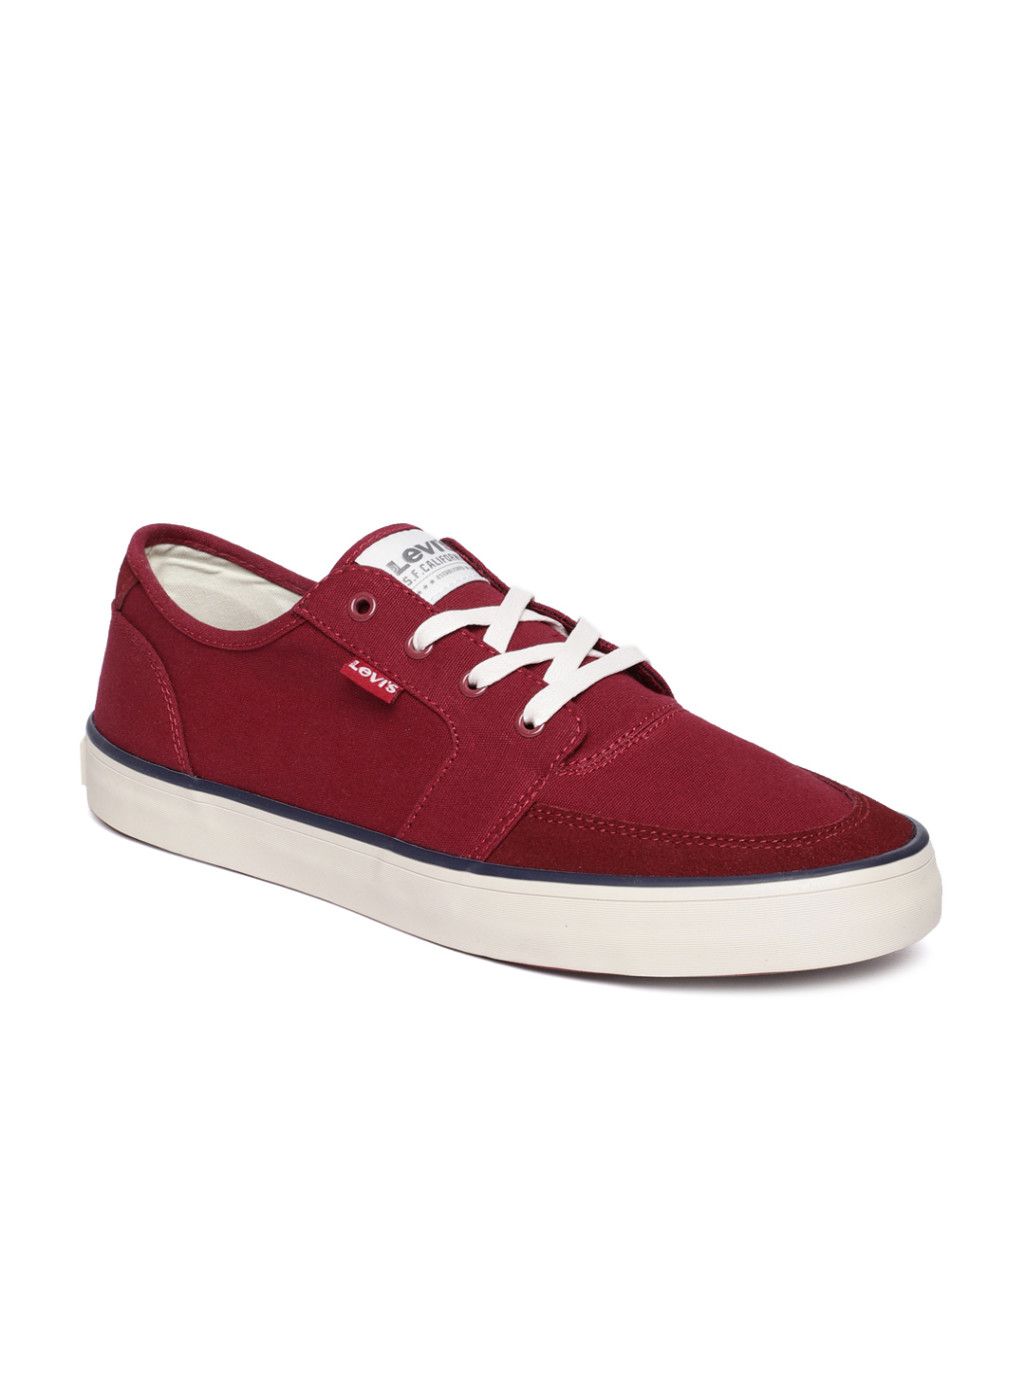 levi's red sneakers